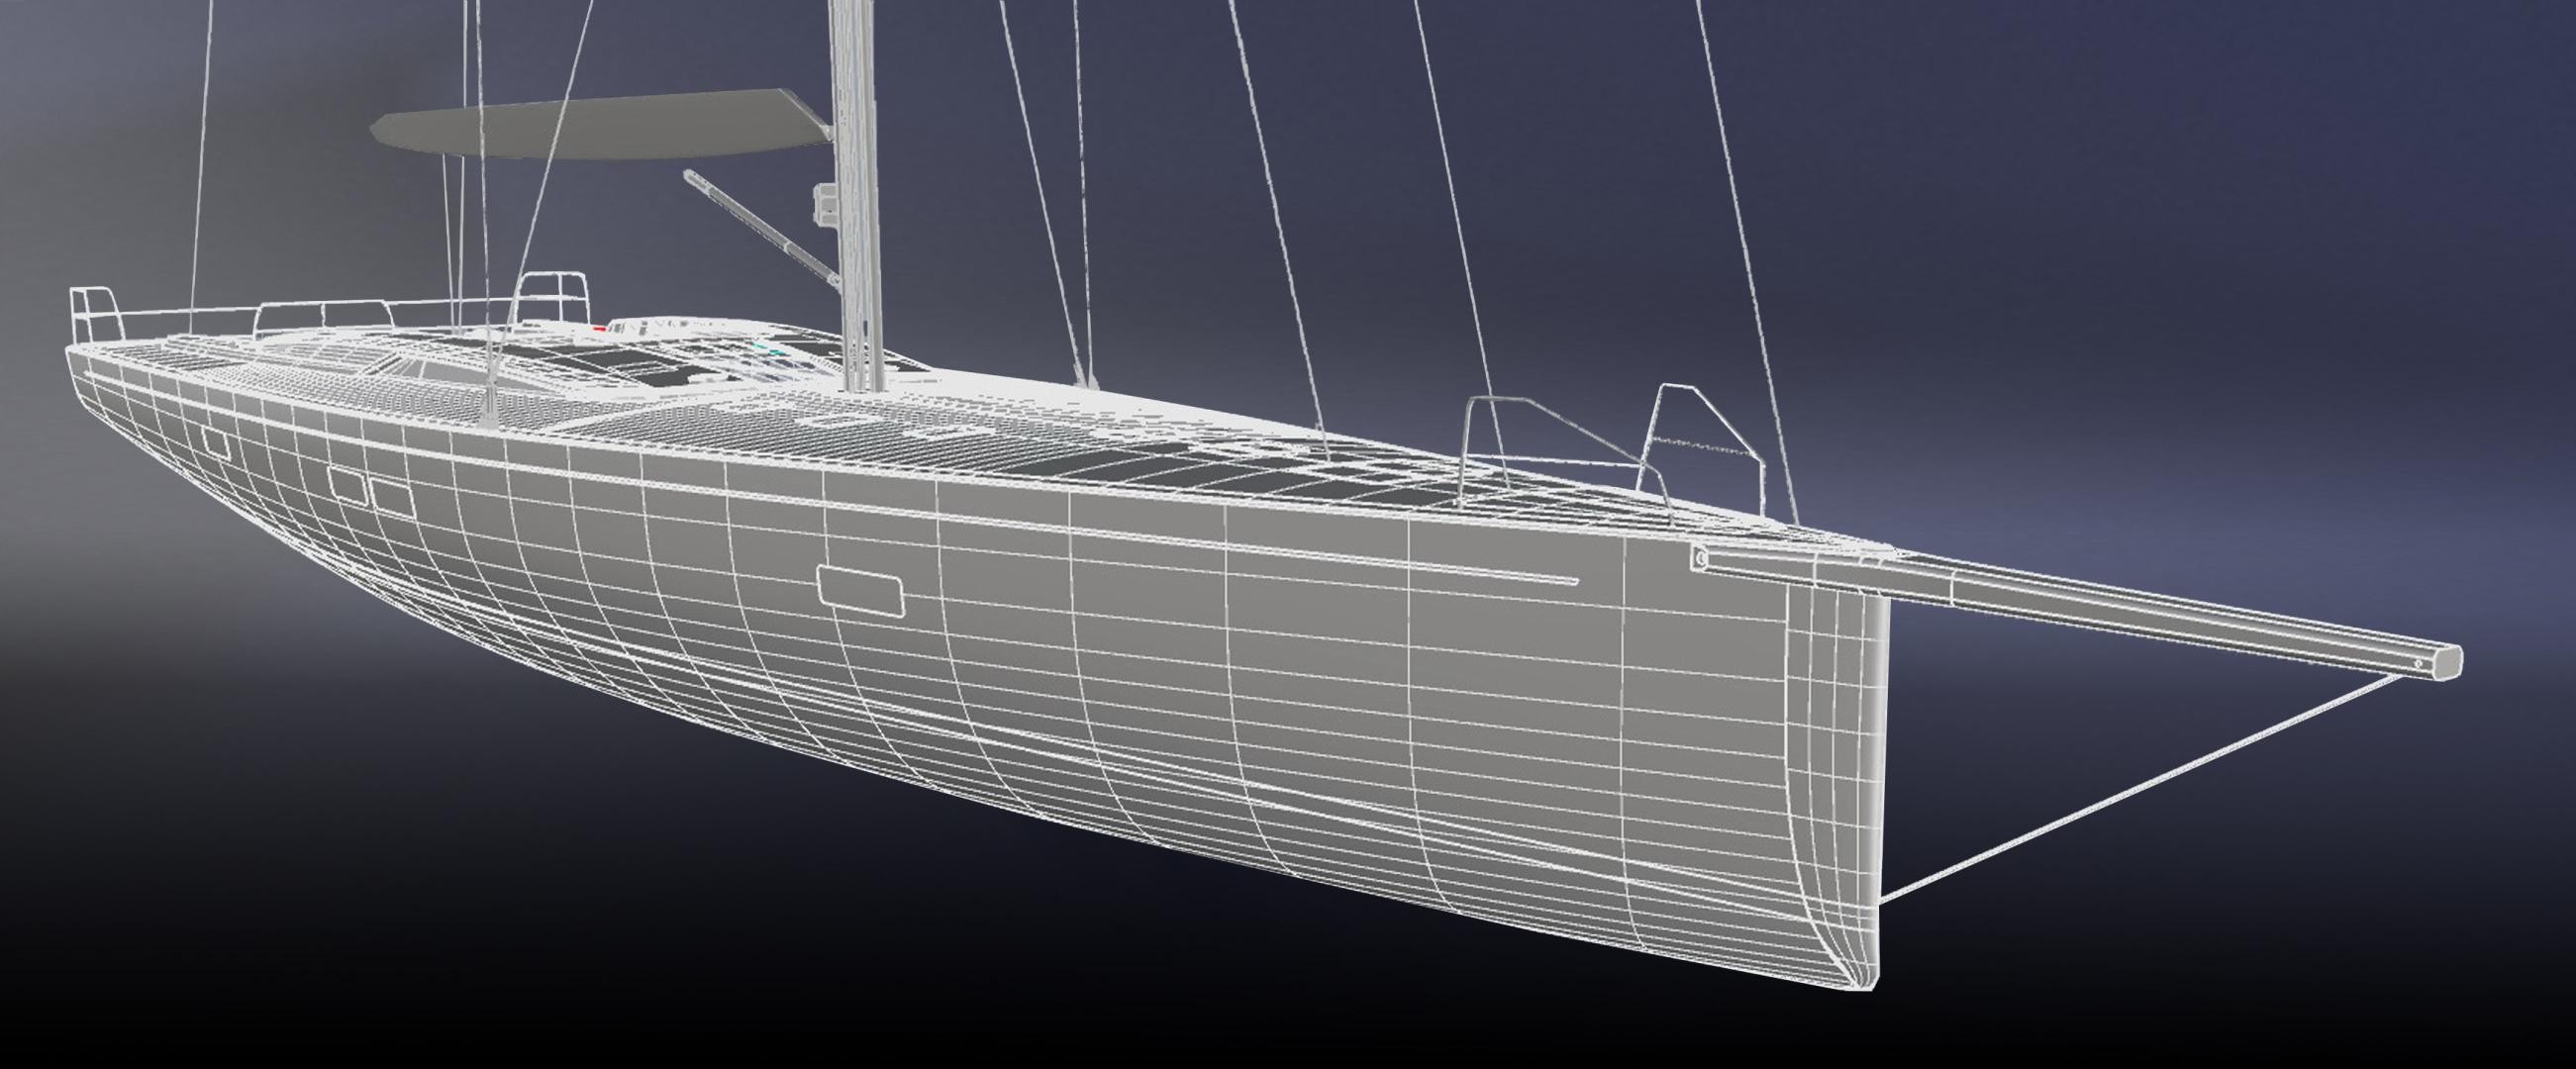 Southern Wind announces a new contract for a 100’ custom yacht